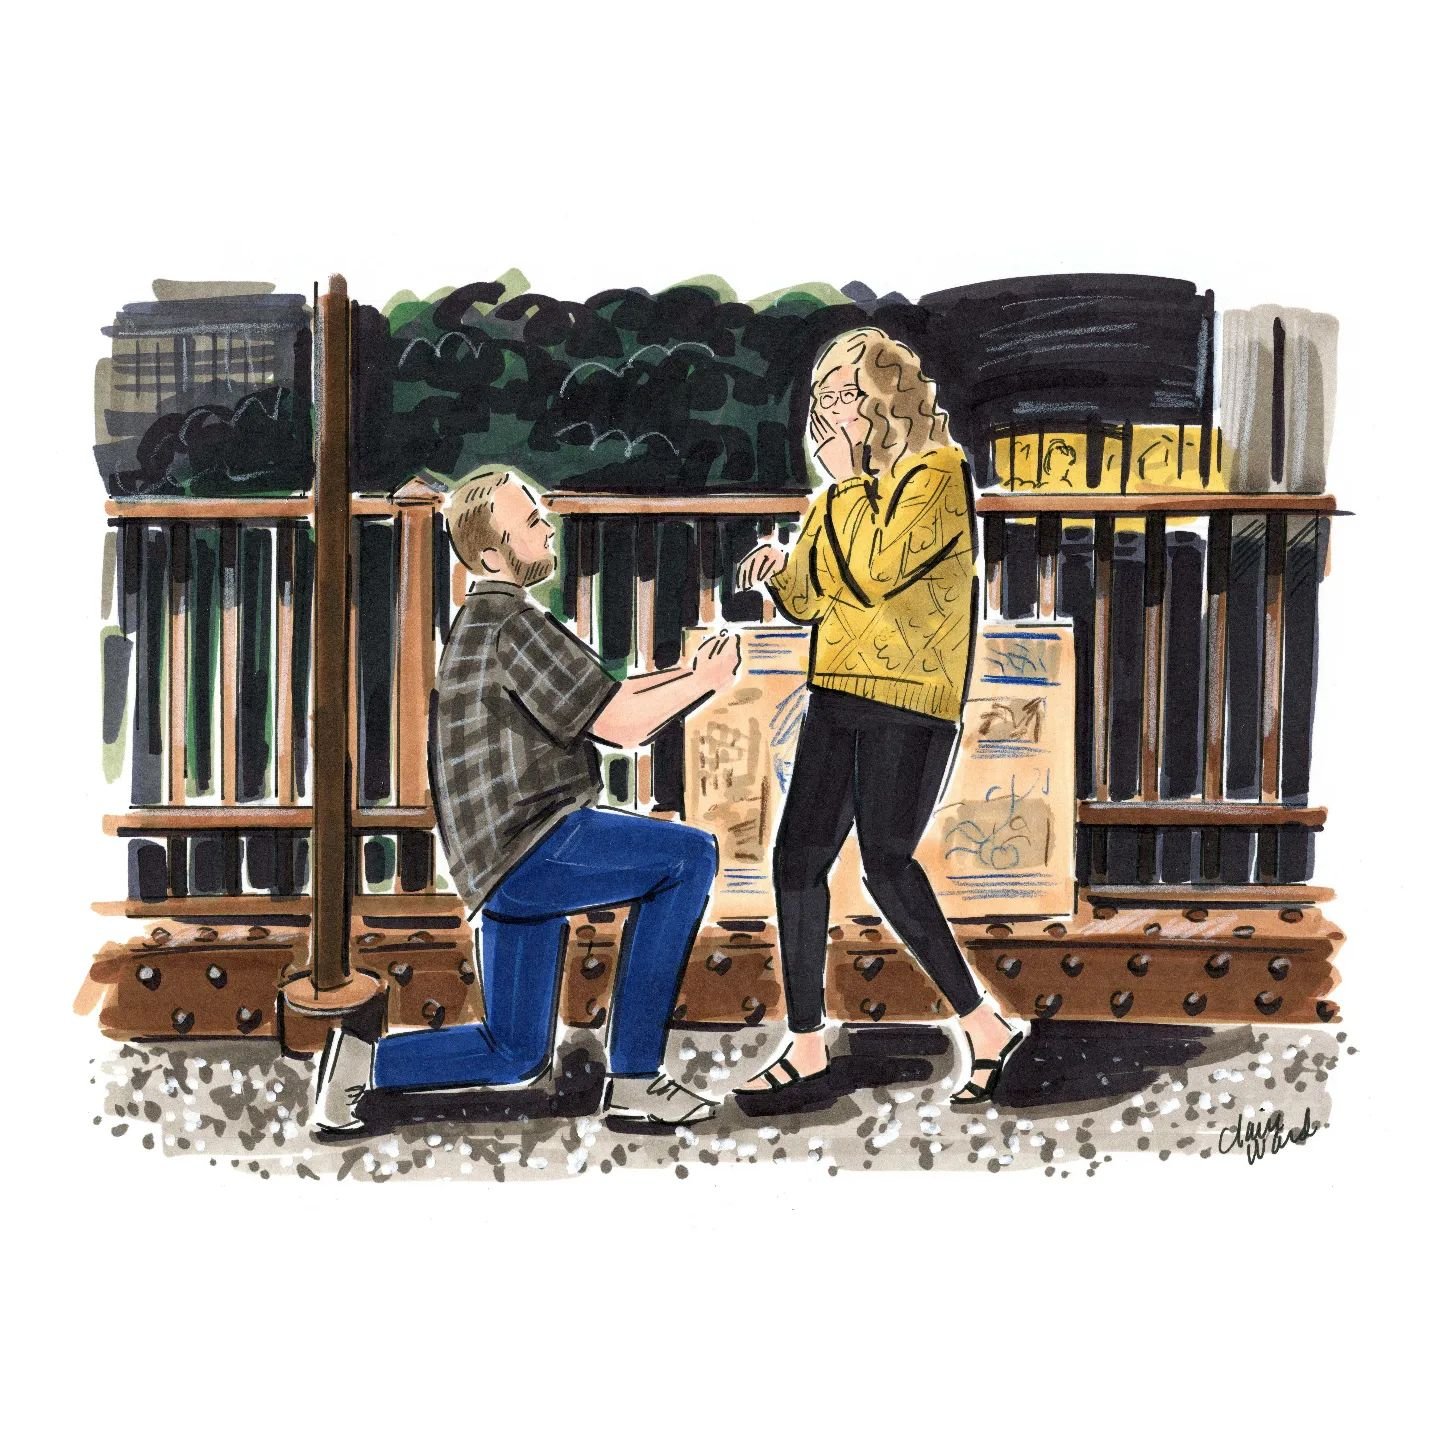 Mill City marriage proposal 🌆💞

#portraitartist #portraitart #portrait #portraitillustration #customportrait #customart #customillustration #illustration #illustratorsoninstagram #commissionsopen #commissions #commissionpainting #commissionedportra